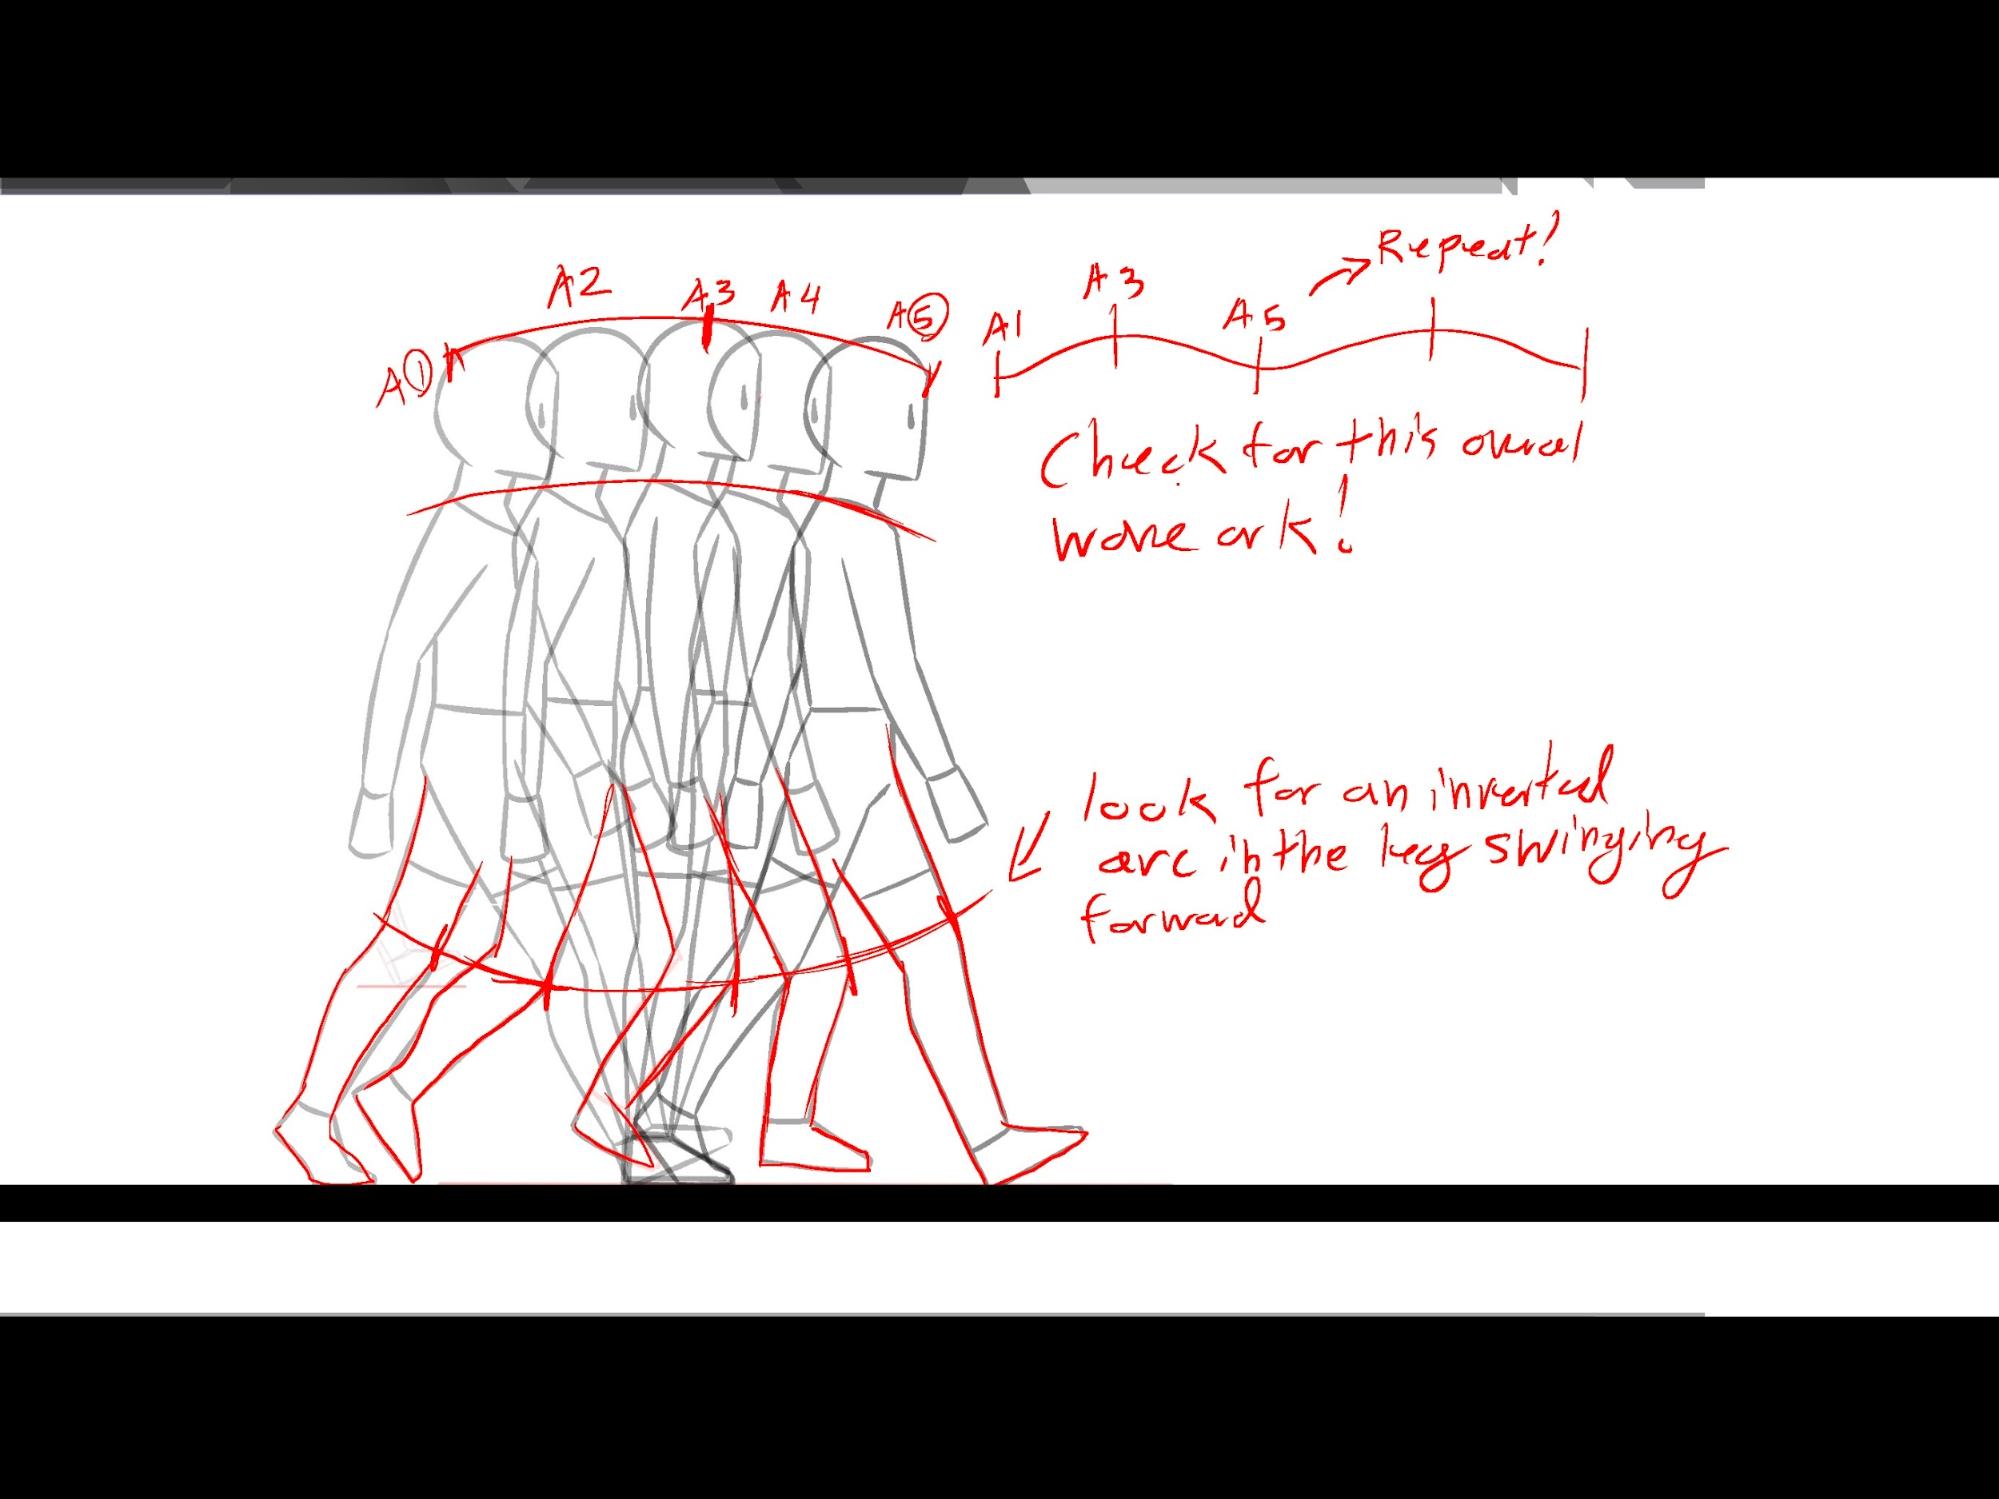 Tutorial - 14 - 3 frame run cycle | Sometimes fewer frames makes more  effective animation  https://www.slynyrd.com/blog/2018/8/19/pixelblog-8-intro-to-animation | By  SlynyrdFacebook